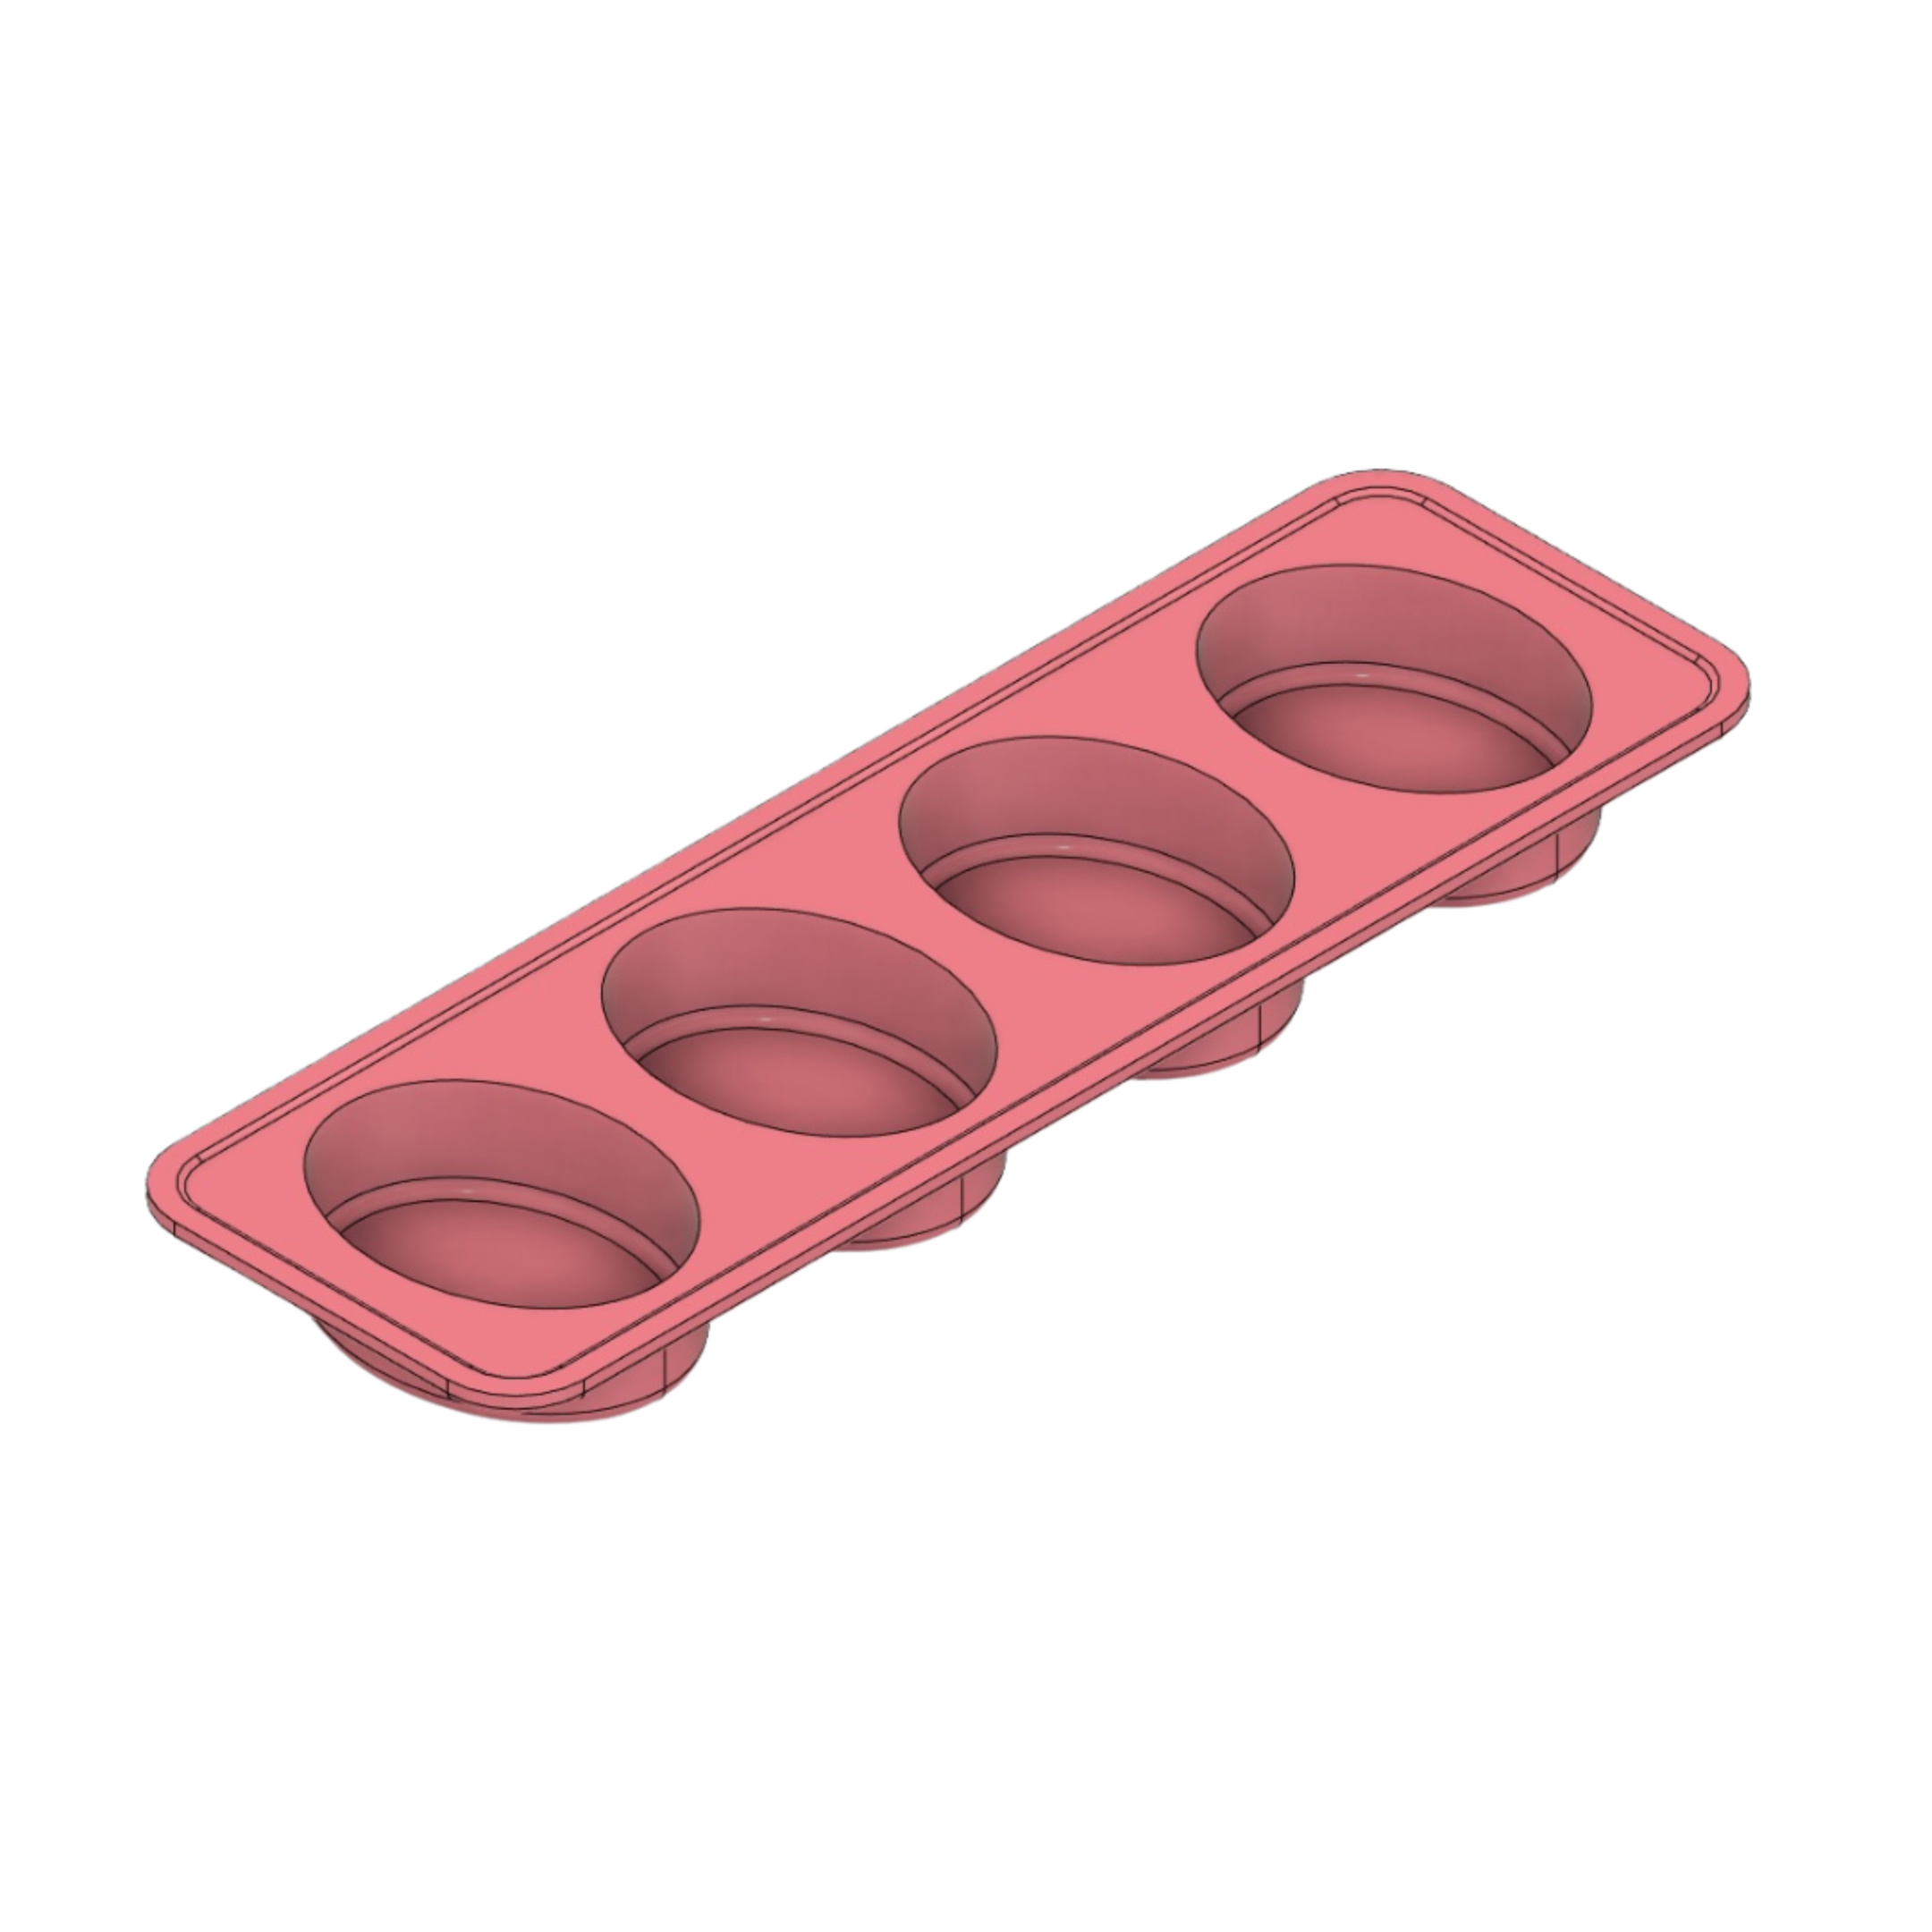 125ml Oval Soap Mould - The Mould Story